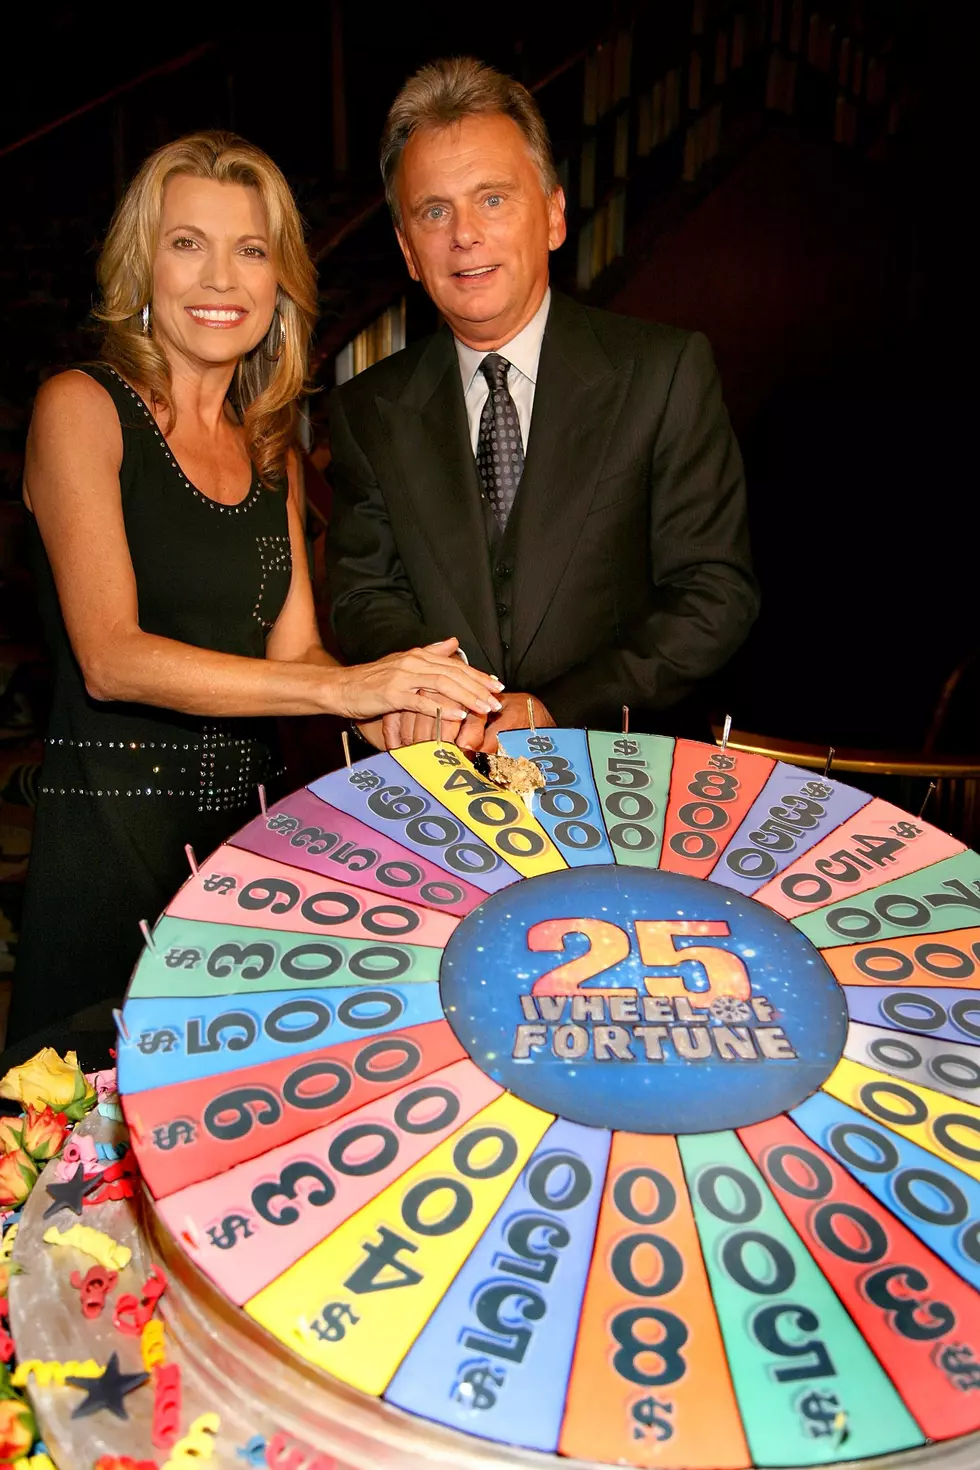 I’ve Been to a Taping of Wheel of Fortune, Pat Sajak Didn’t Give Away an Answer Like He Did This Time